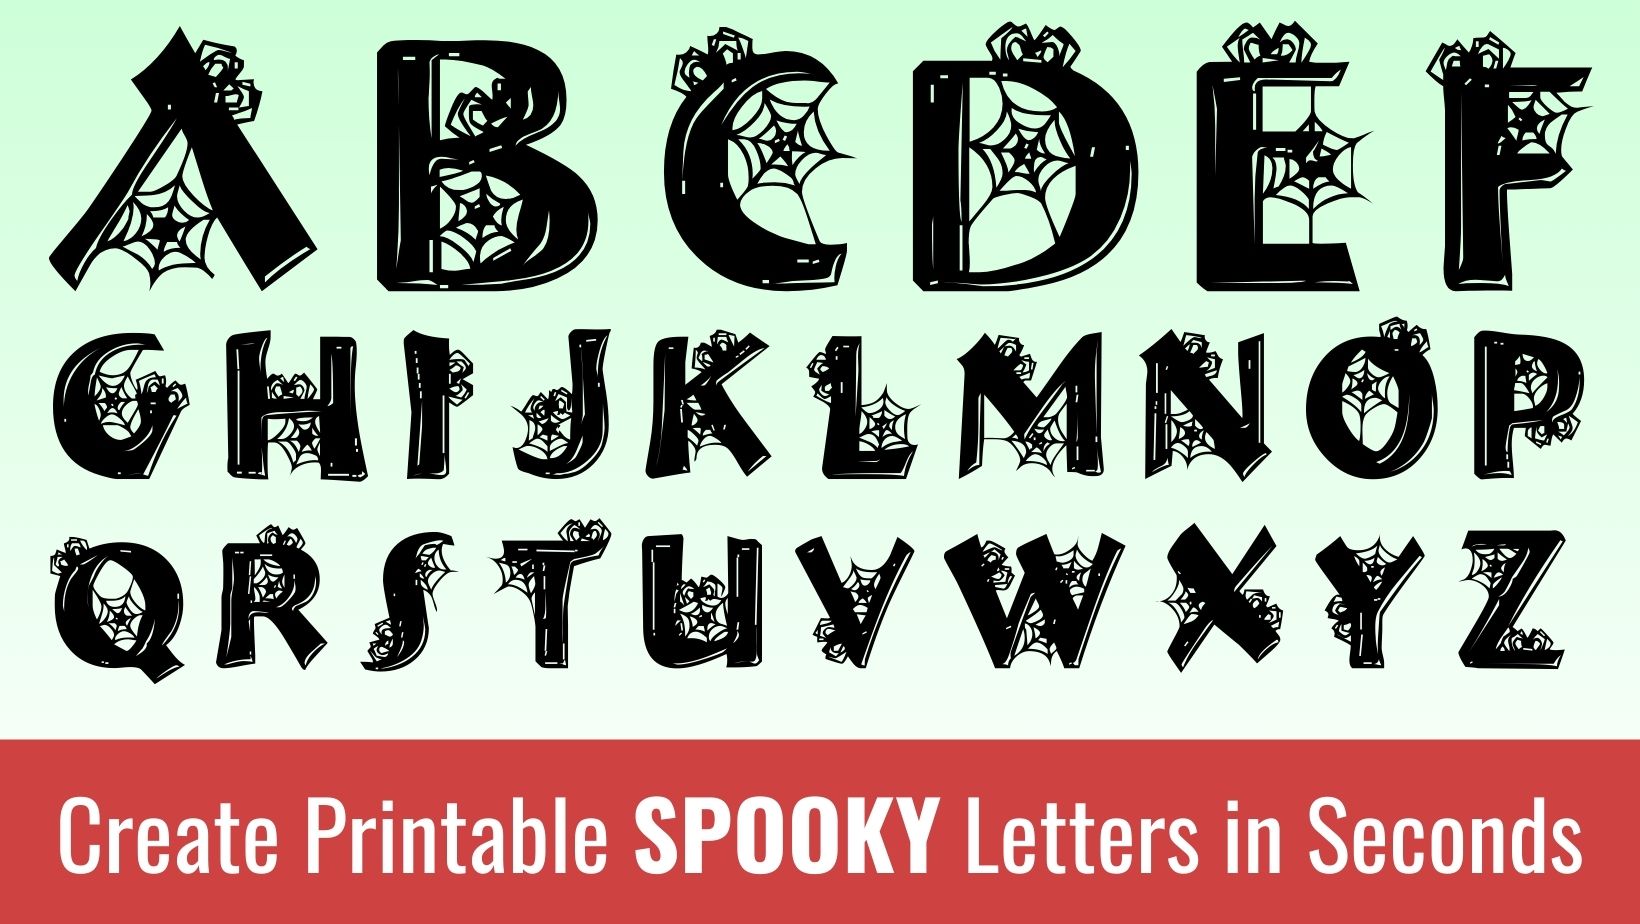 Printable spooky halloween Letters: Free Alphabet Font and Letter Templates